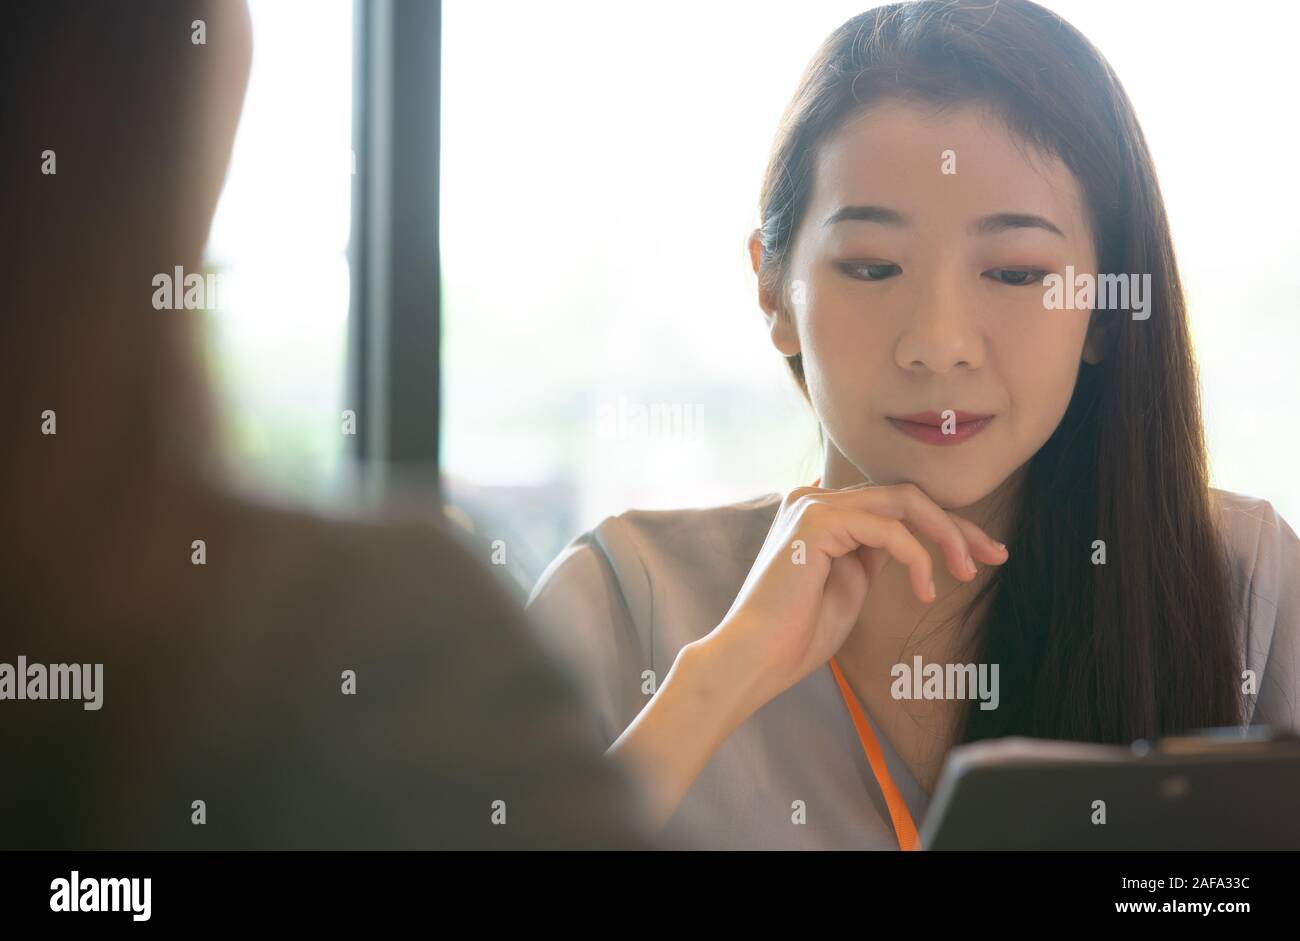 young asian woman Interviewer. Hiring employee concept. Stock Photo